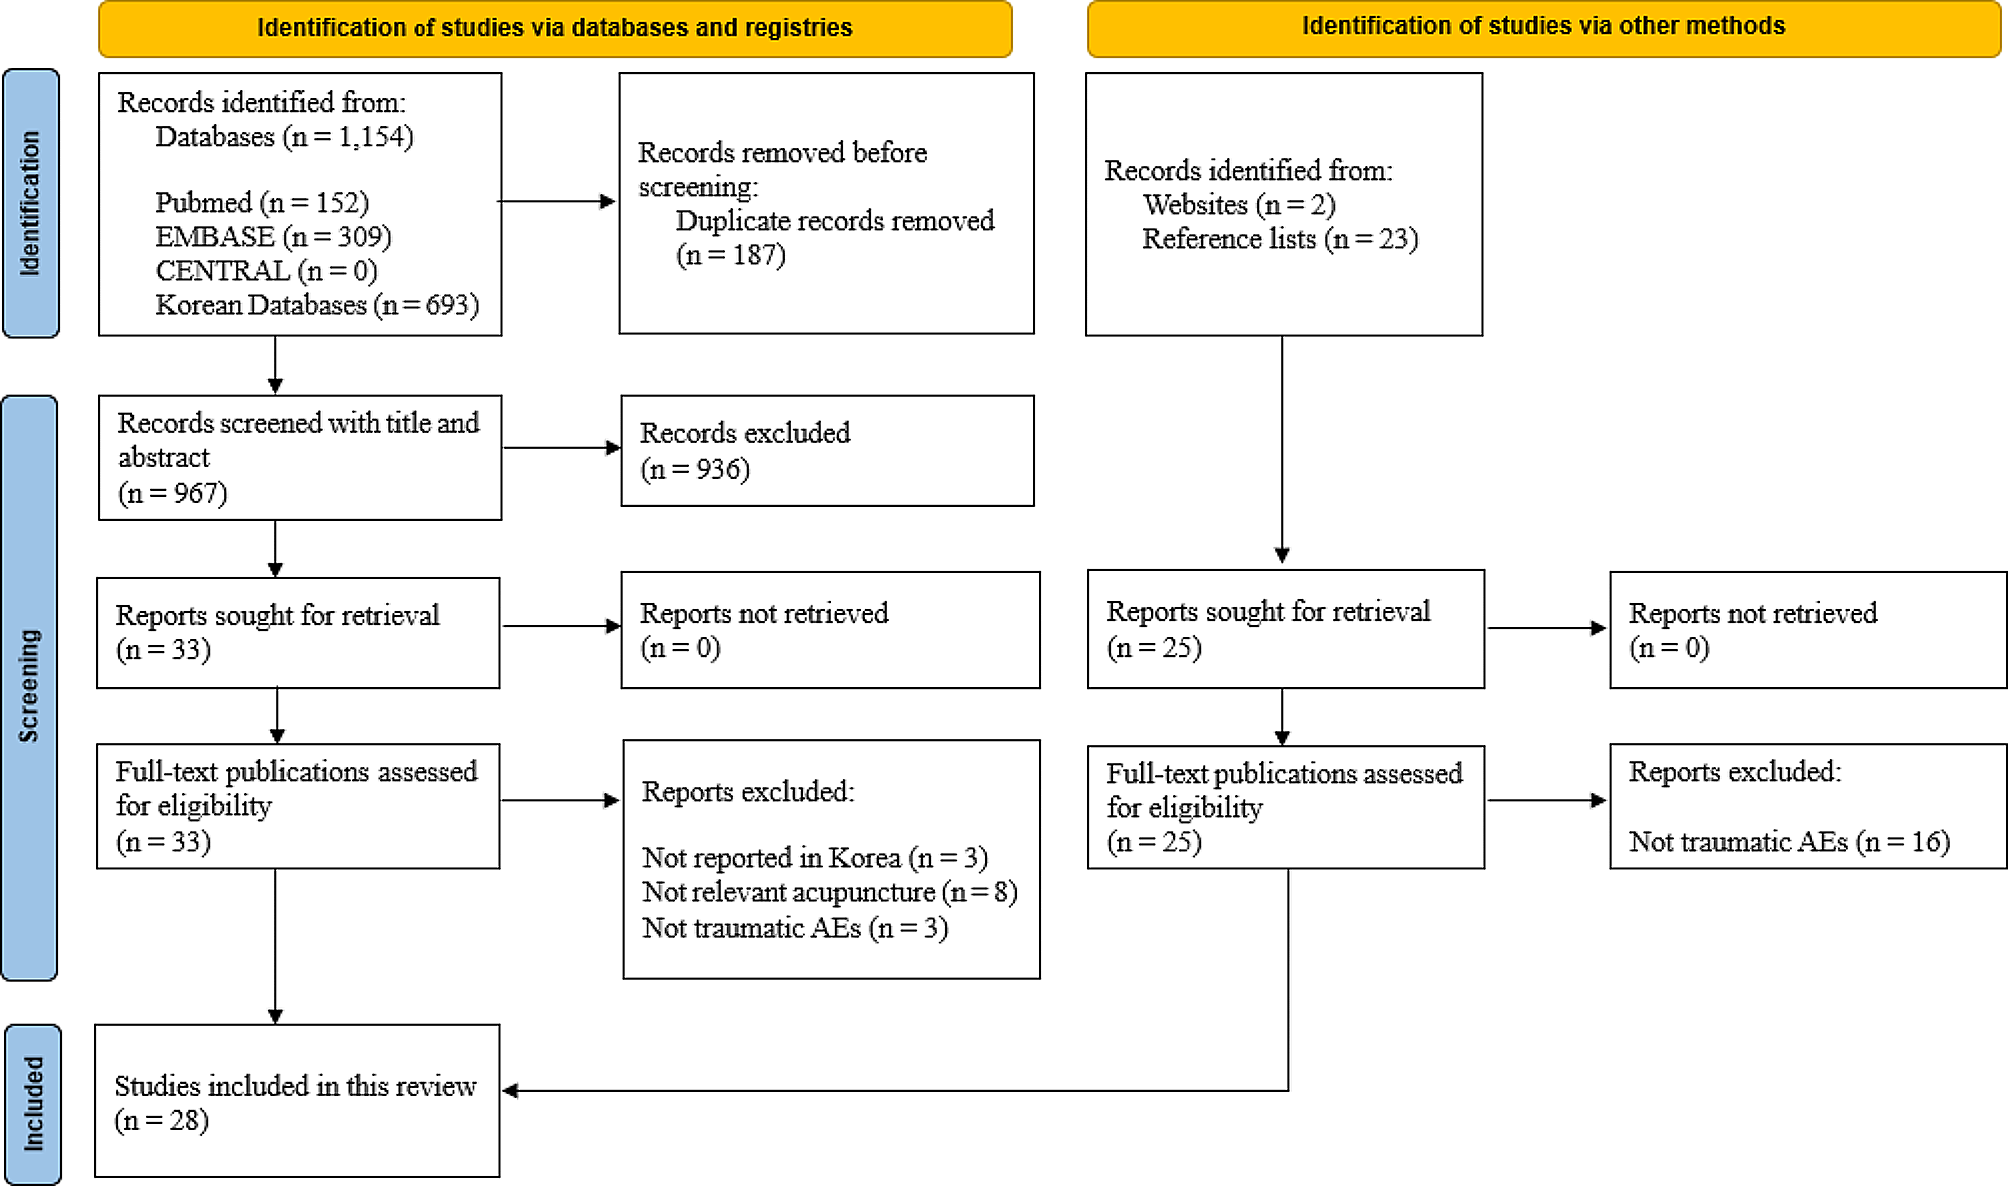 The reporting quality of acupuncture-related traumatic adverse events: a systematic review of case studies in Korea